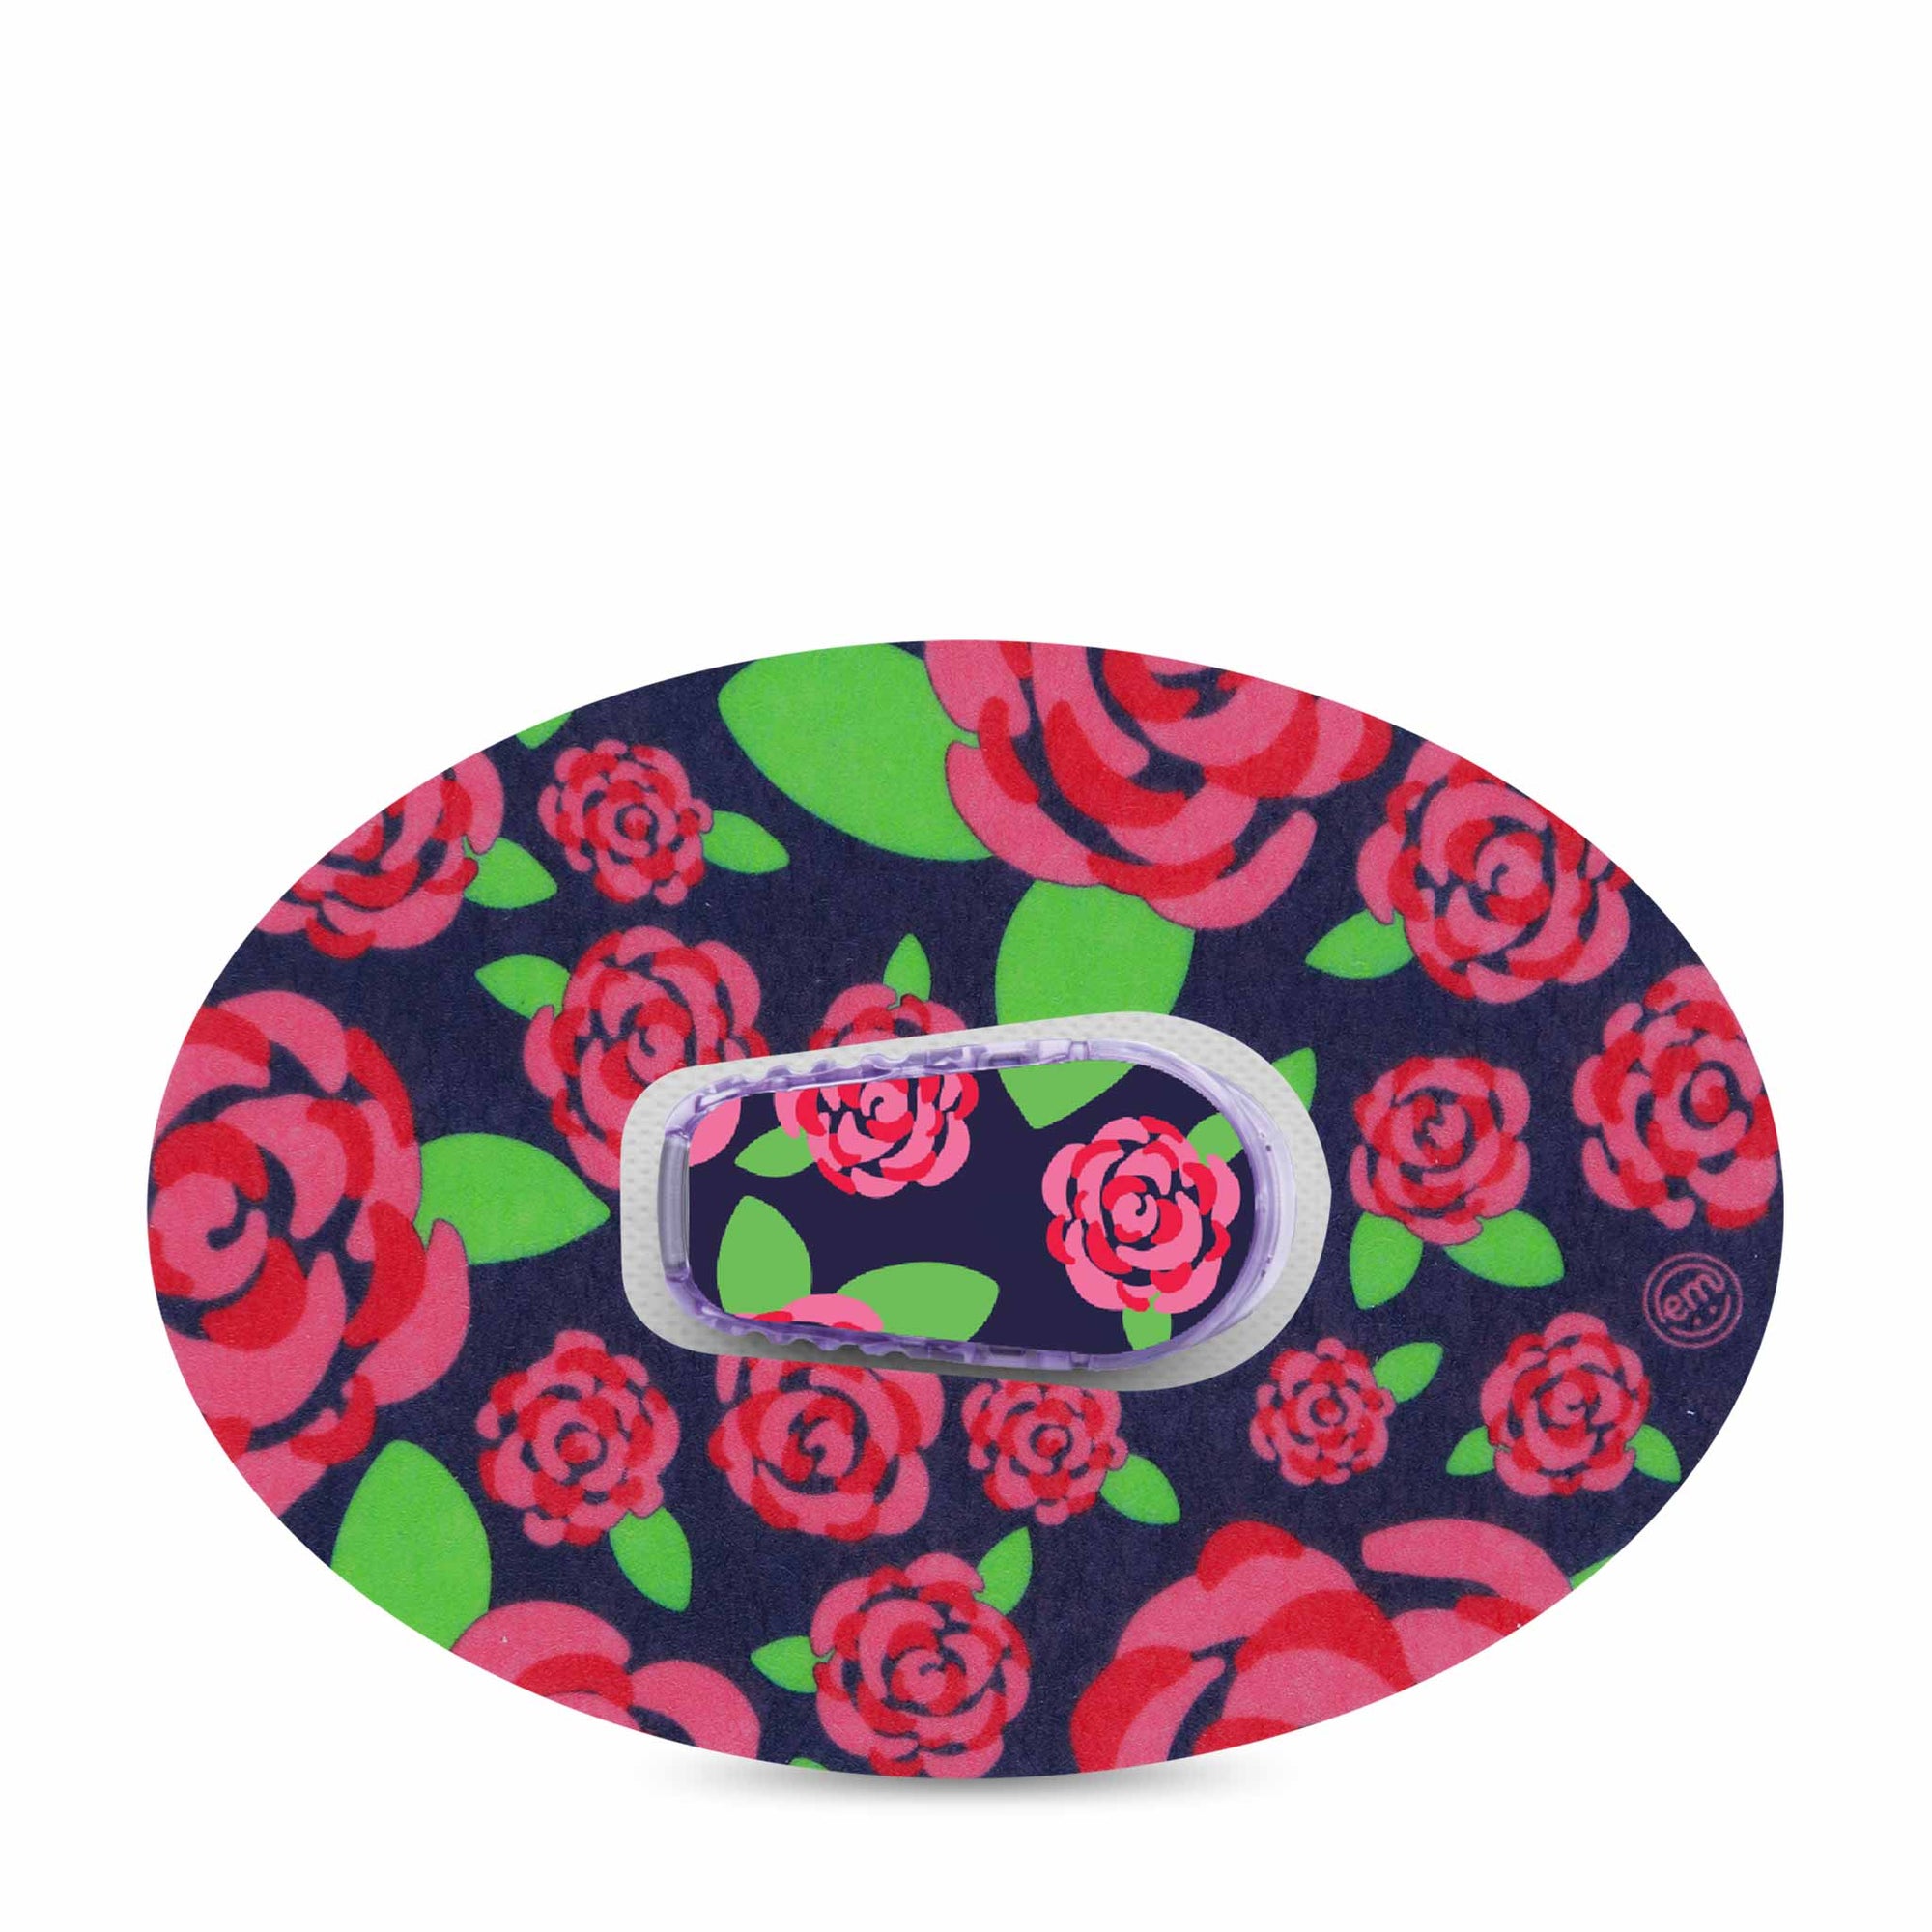 ExpressionMed Pretty Pink Roses Dexcom G6 Transmitter Sticker with Tape